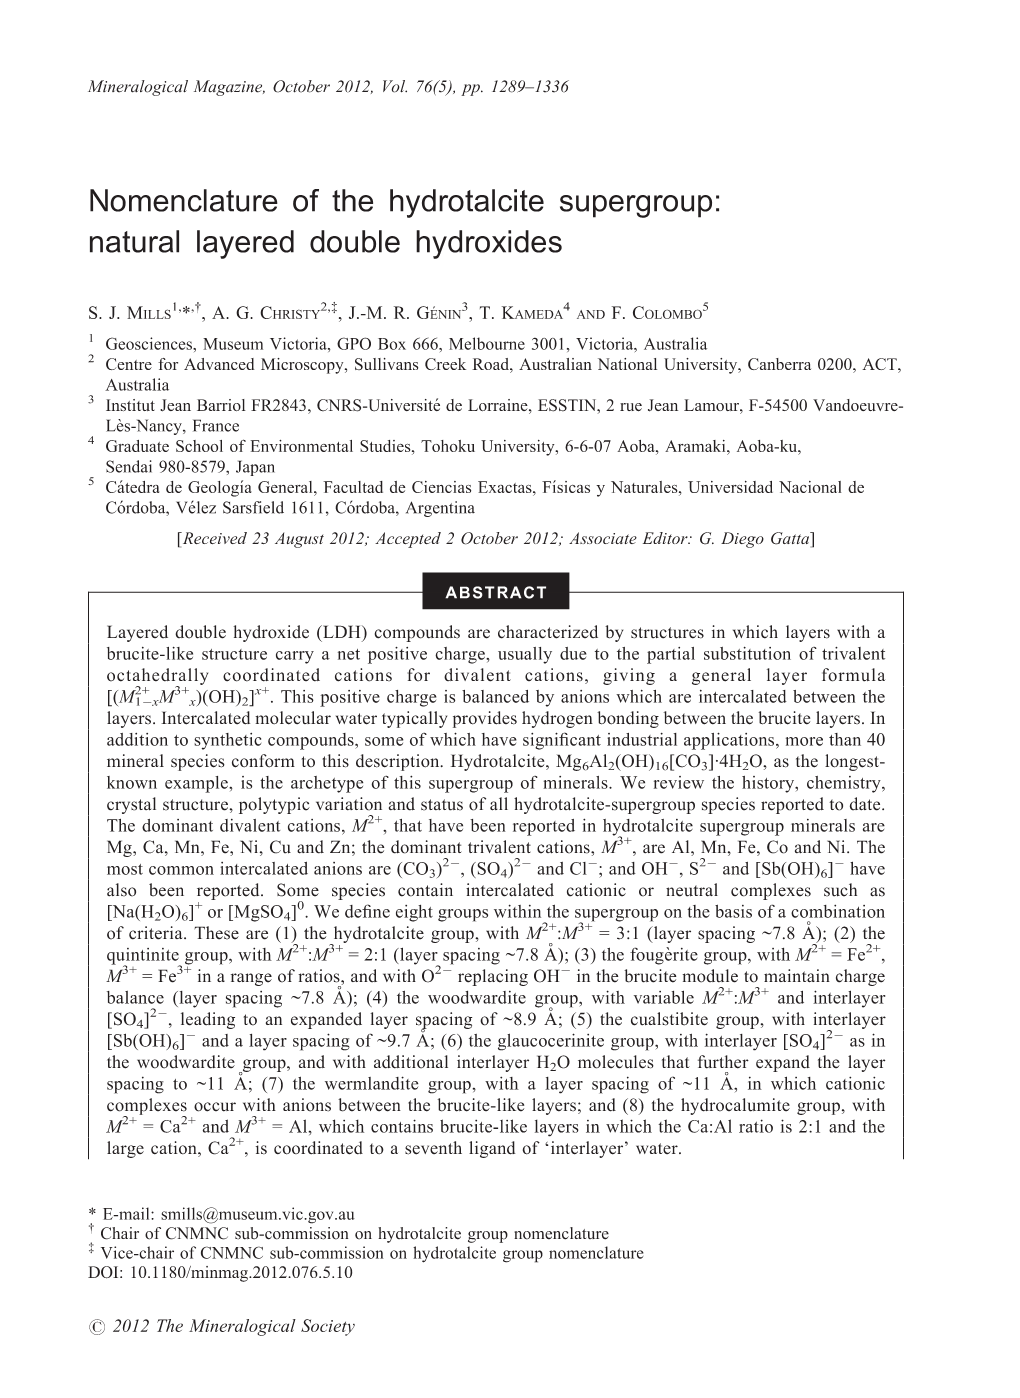 Nomenclature of the Hydrotalcite Supergroup: Natural Layered Double Hydroxides